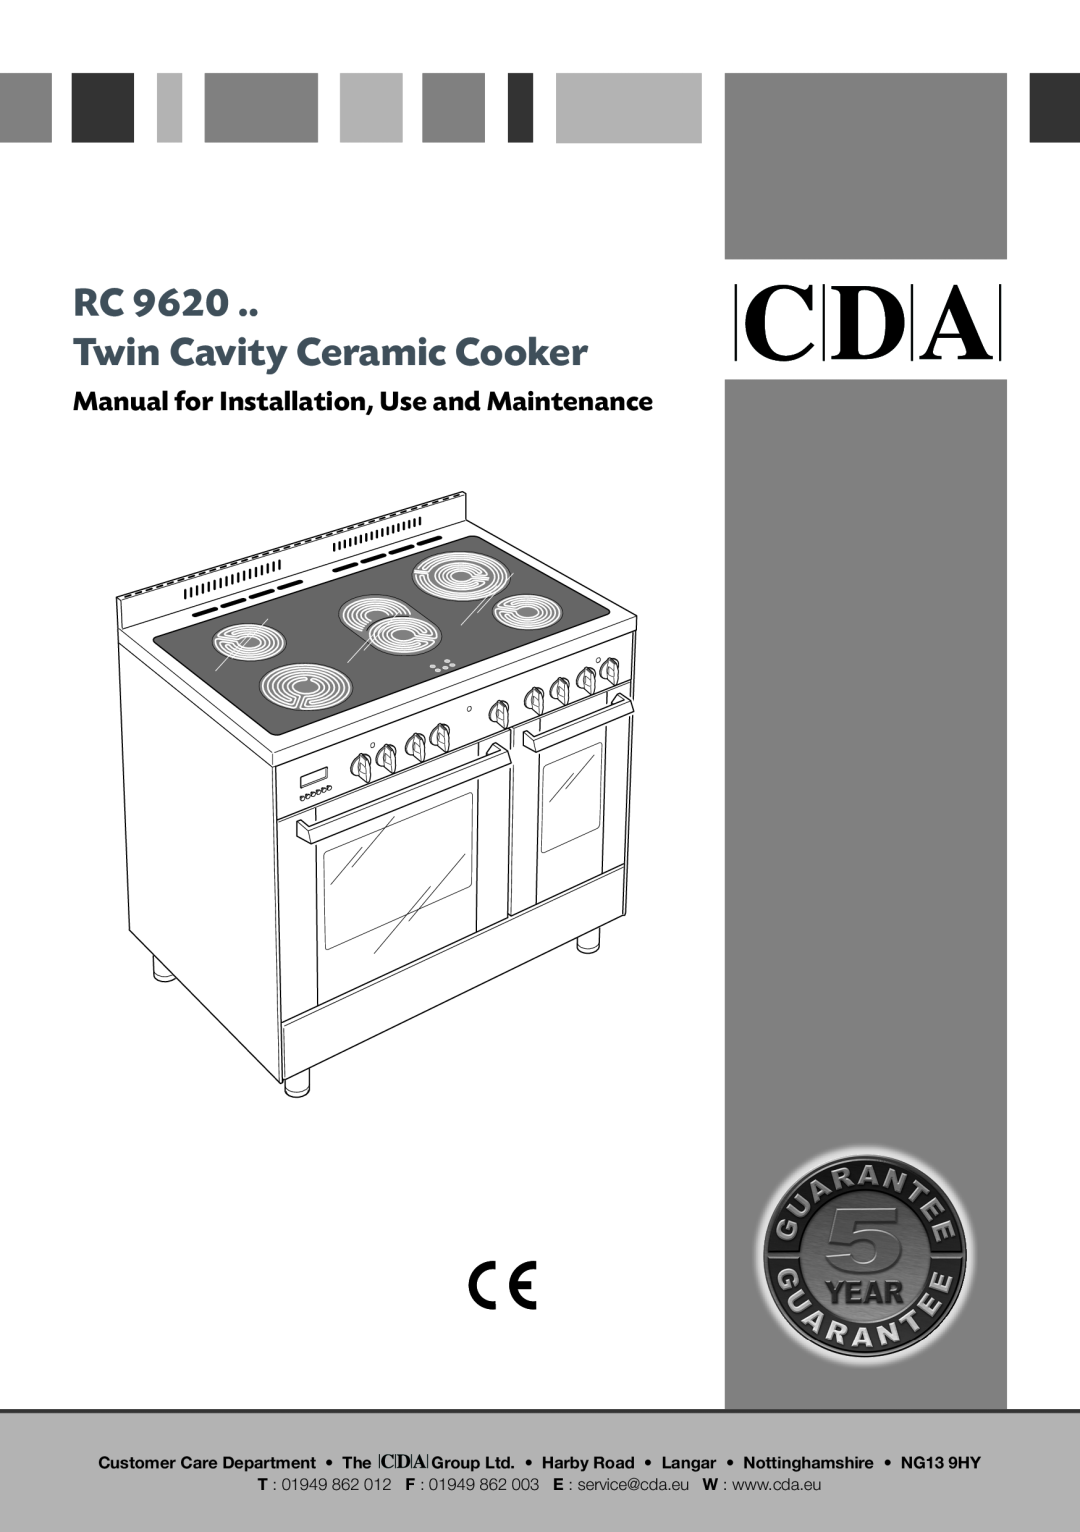 CDA RC 9620 manual RC Twin Cavity Ceramic Cooker, Manual for Installation, Use and Maintenance, T 01949 862 